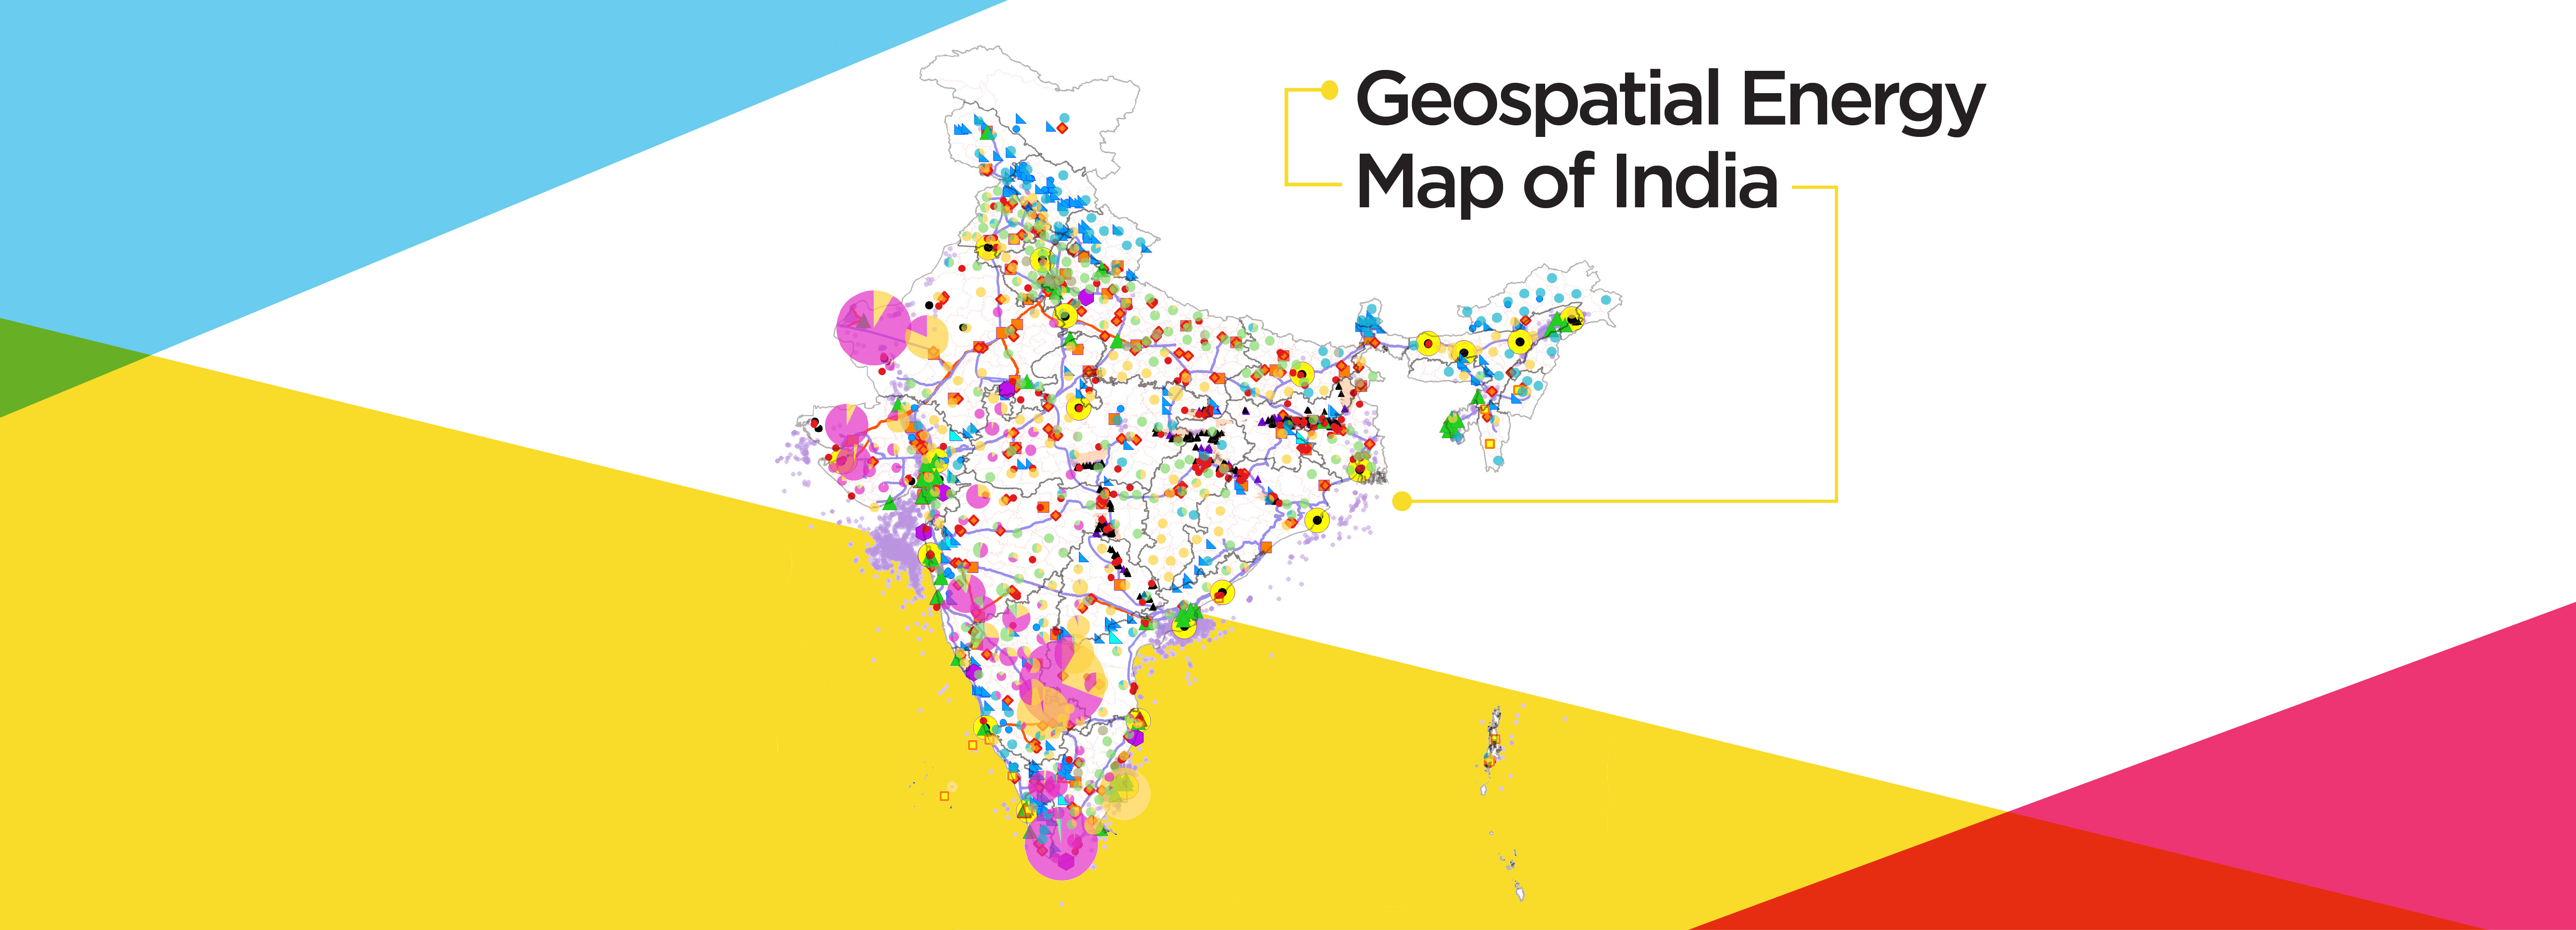 Energy Swaraj: Geospatial Energy Map of India Presents Immense Potential and Opportunities